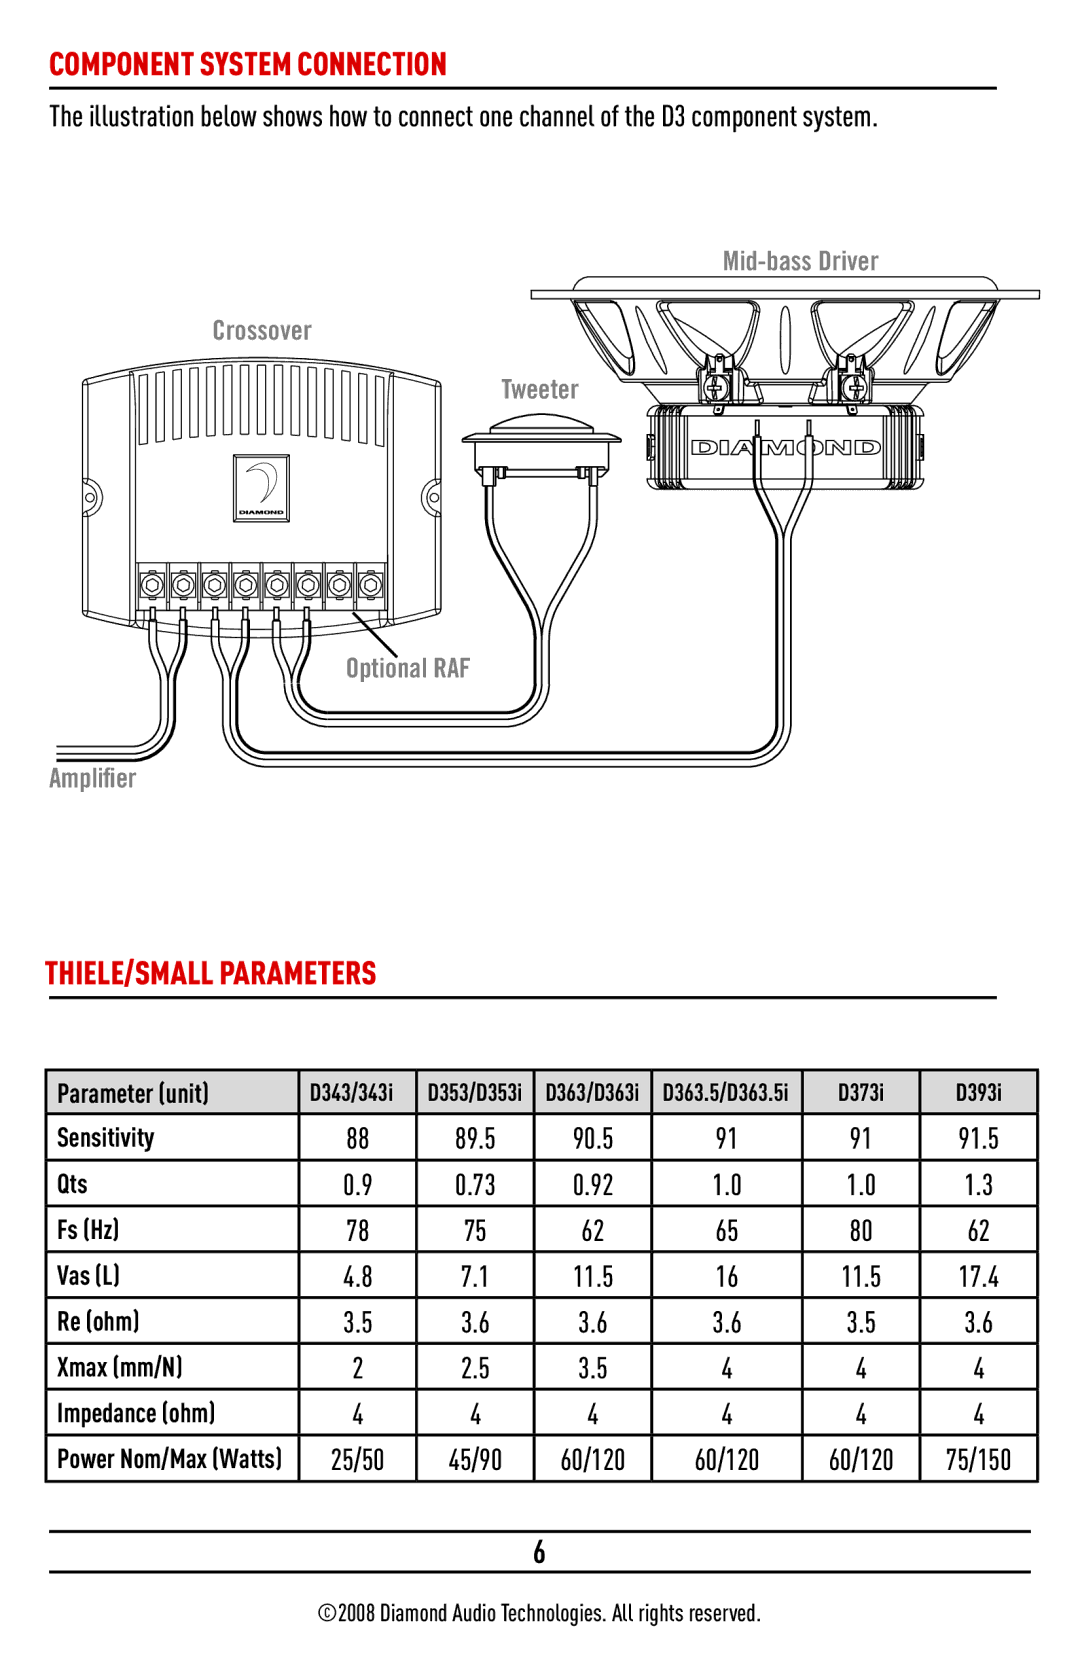 Diamond D343I, D393I, D373I, D363.5I, D363I, D353I installation manual Component System Connection, THIELE/SMALL Parameters 